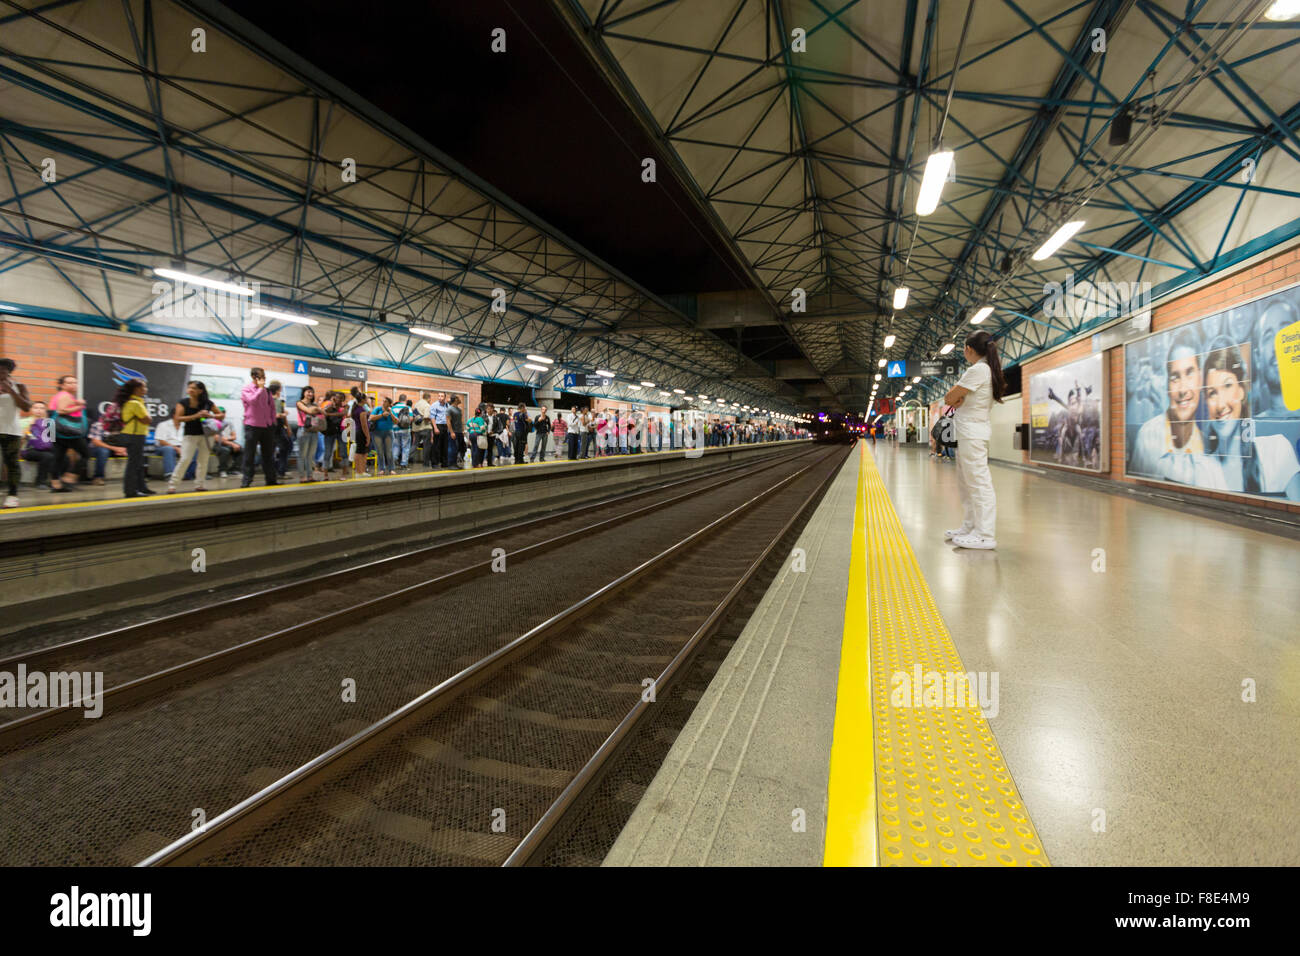 Medellin metro station with railway tracks and people, Colombia Stock Photo